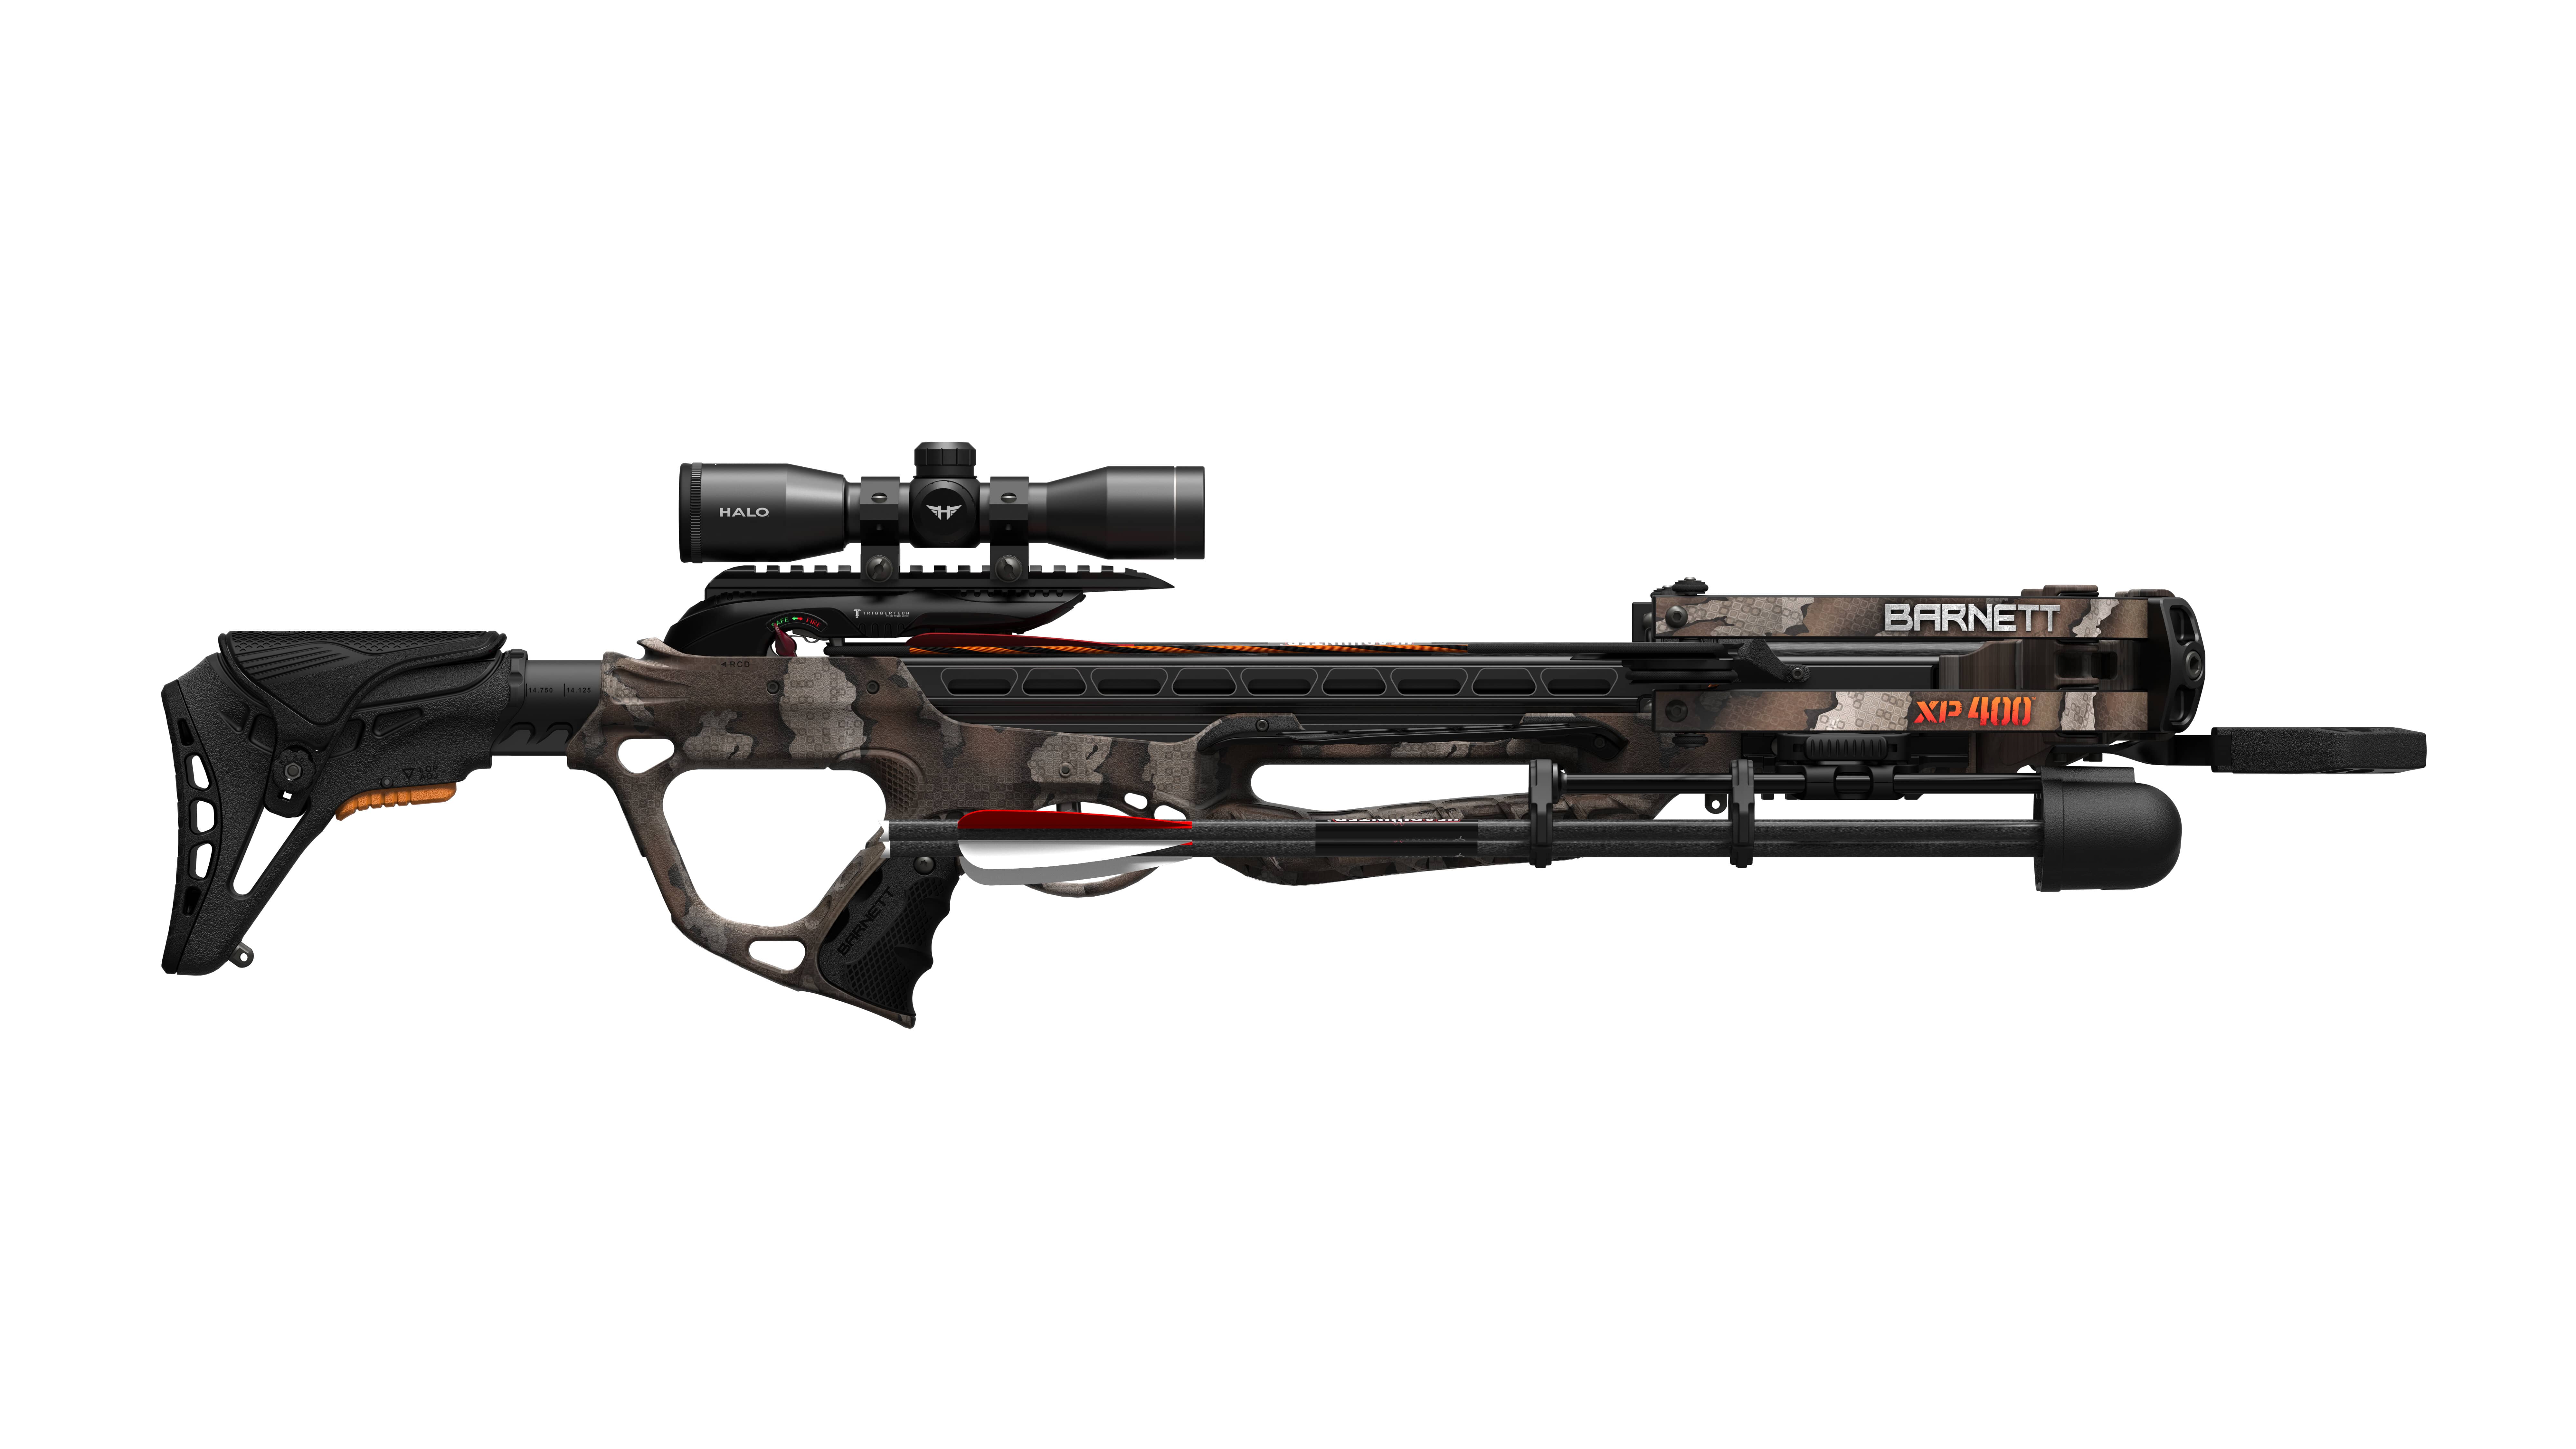 BAR XP400 XBOW Barnett Expedition 400 Crossbow, Crank Cocking Device Included, 400 FPS - image 3 of 9